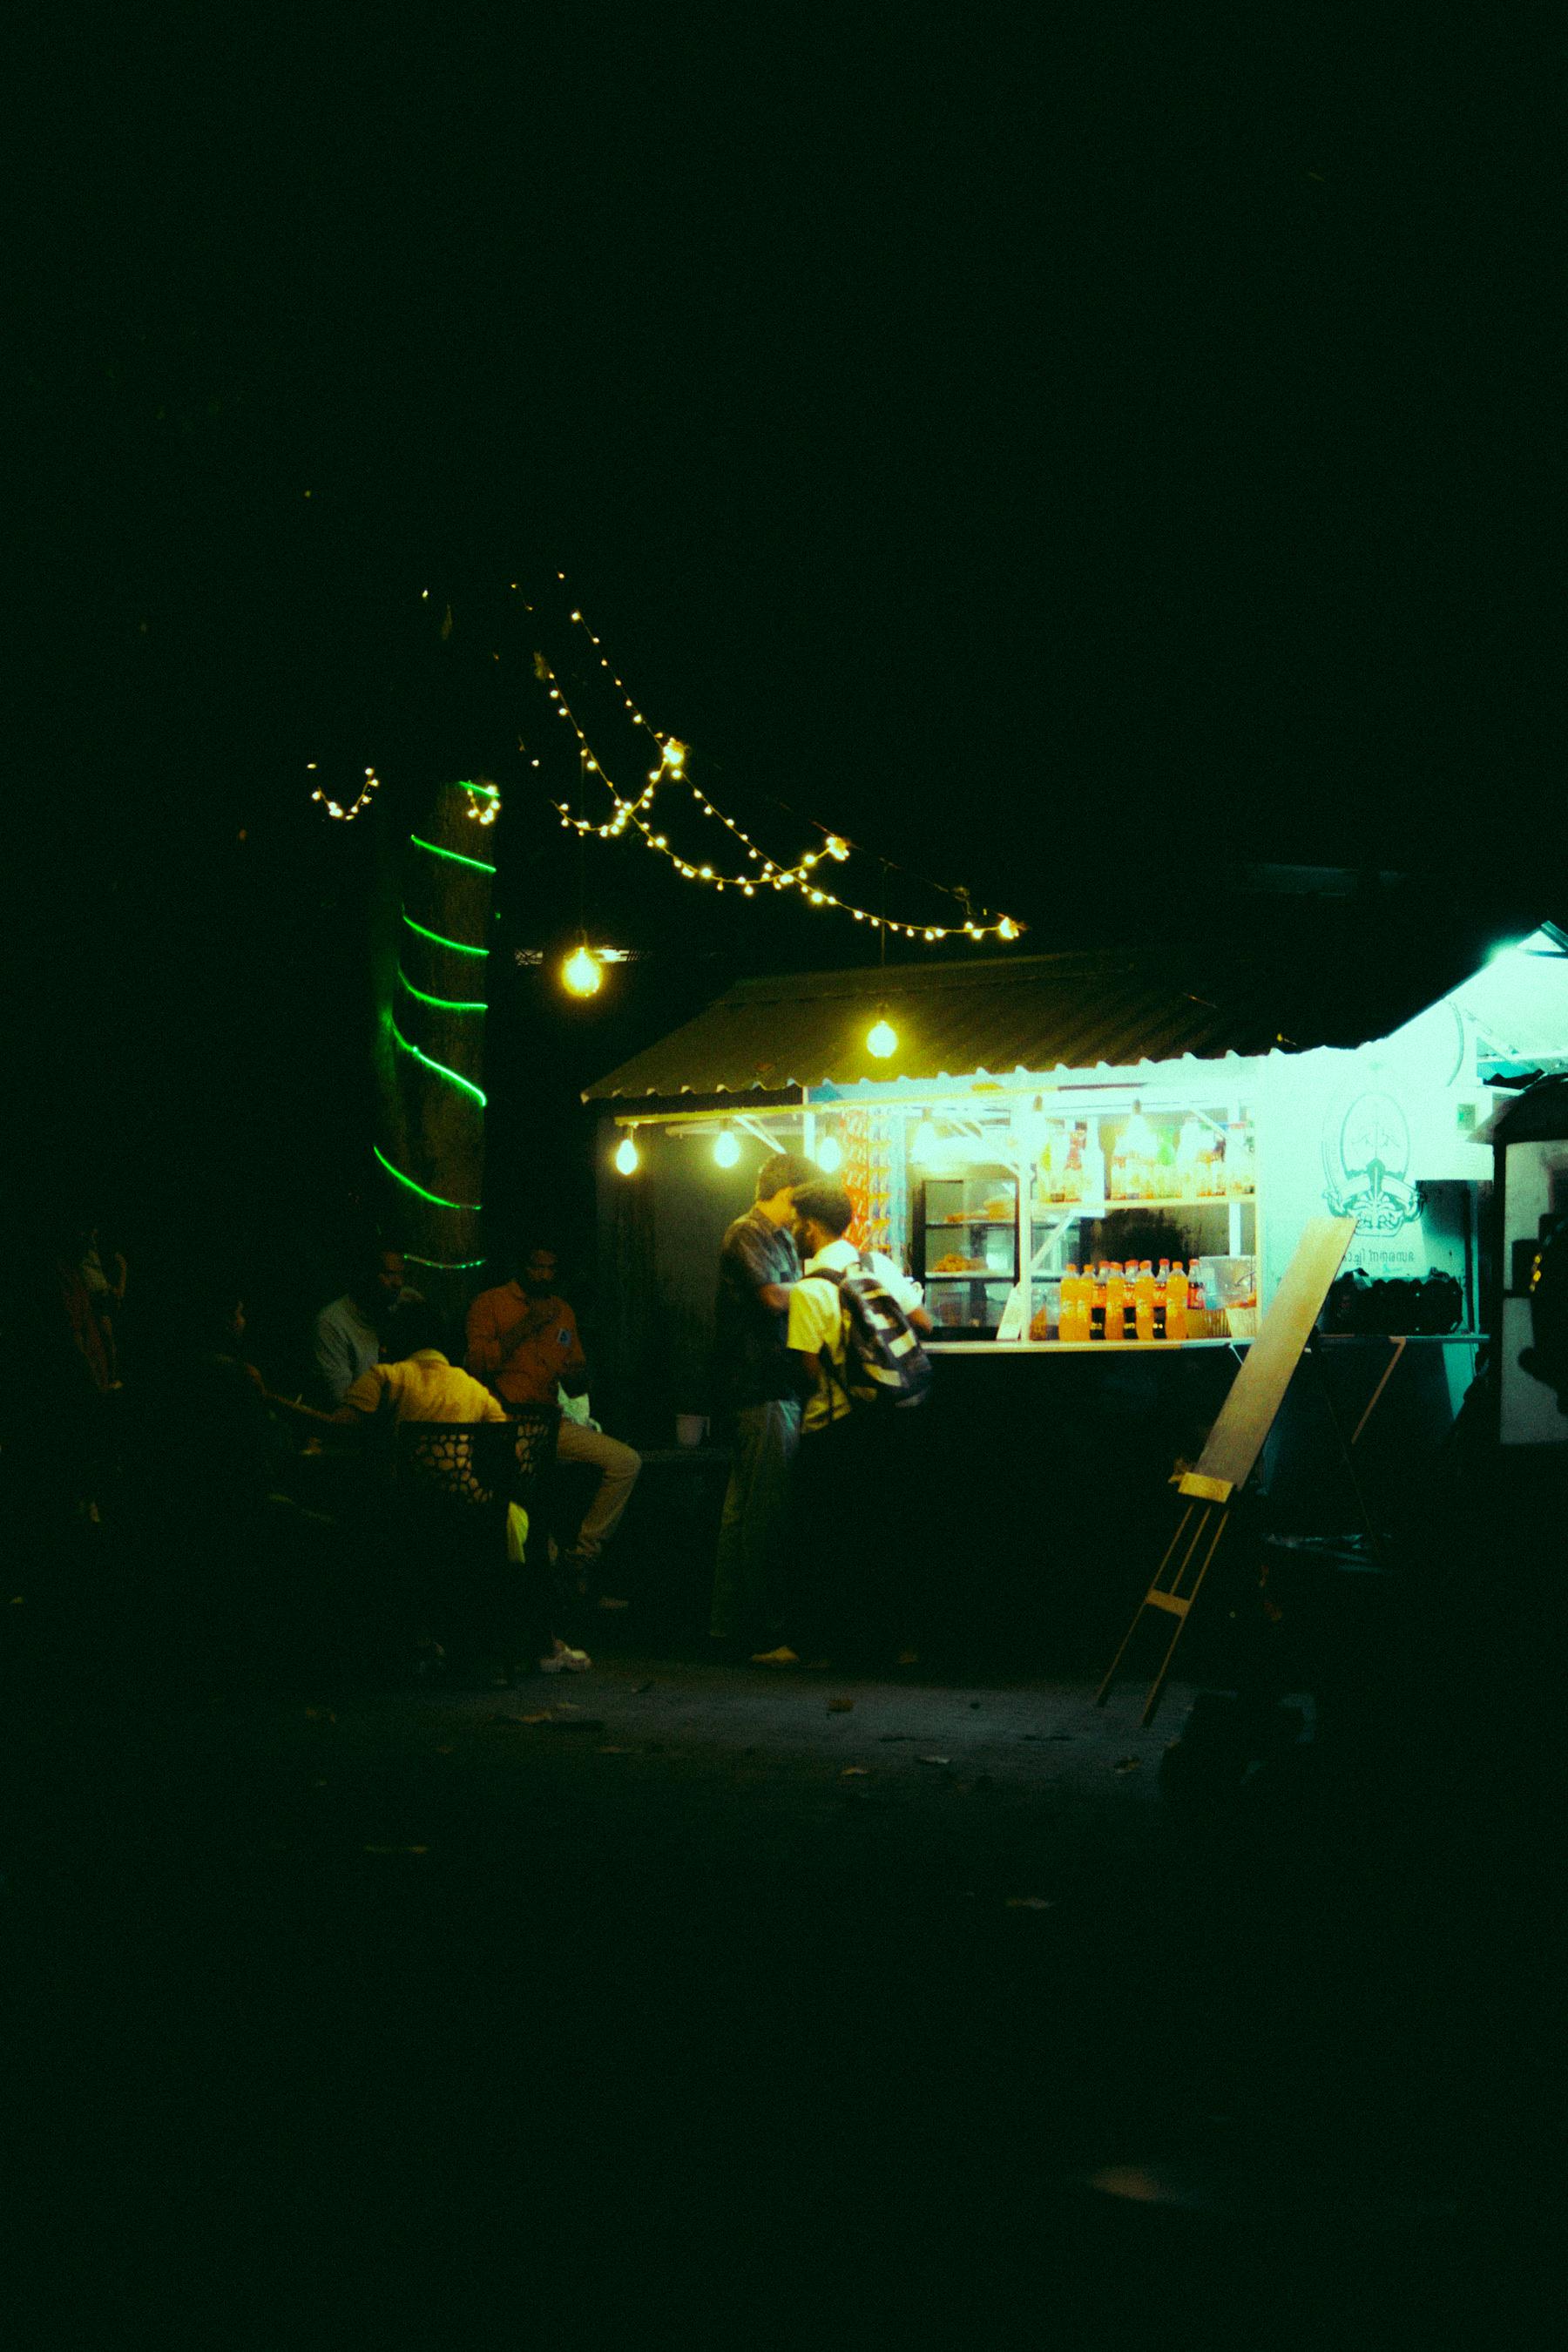 people by food stand at night